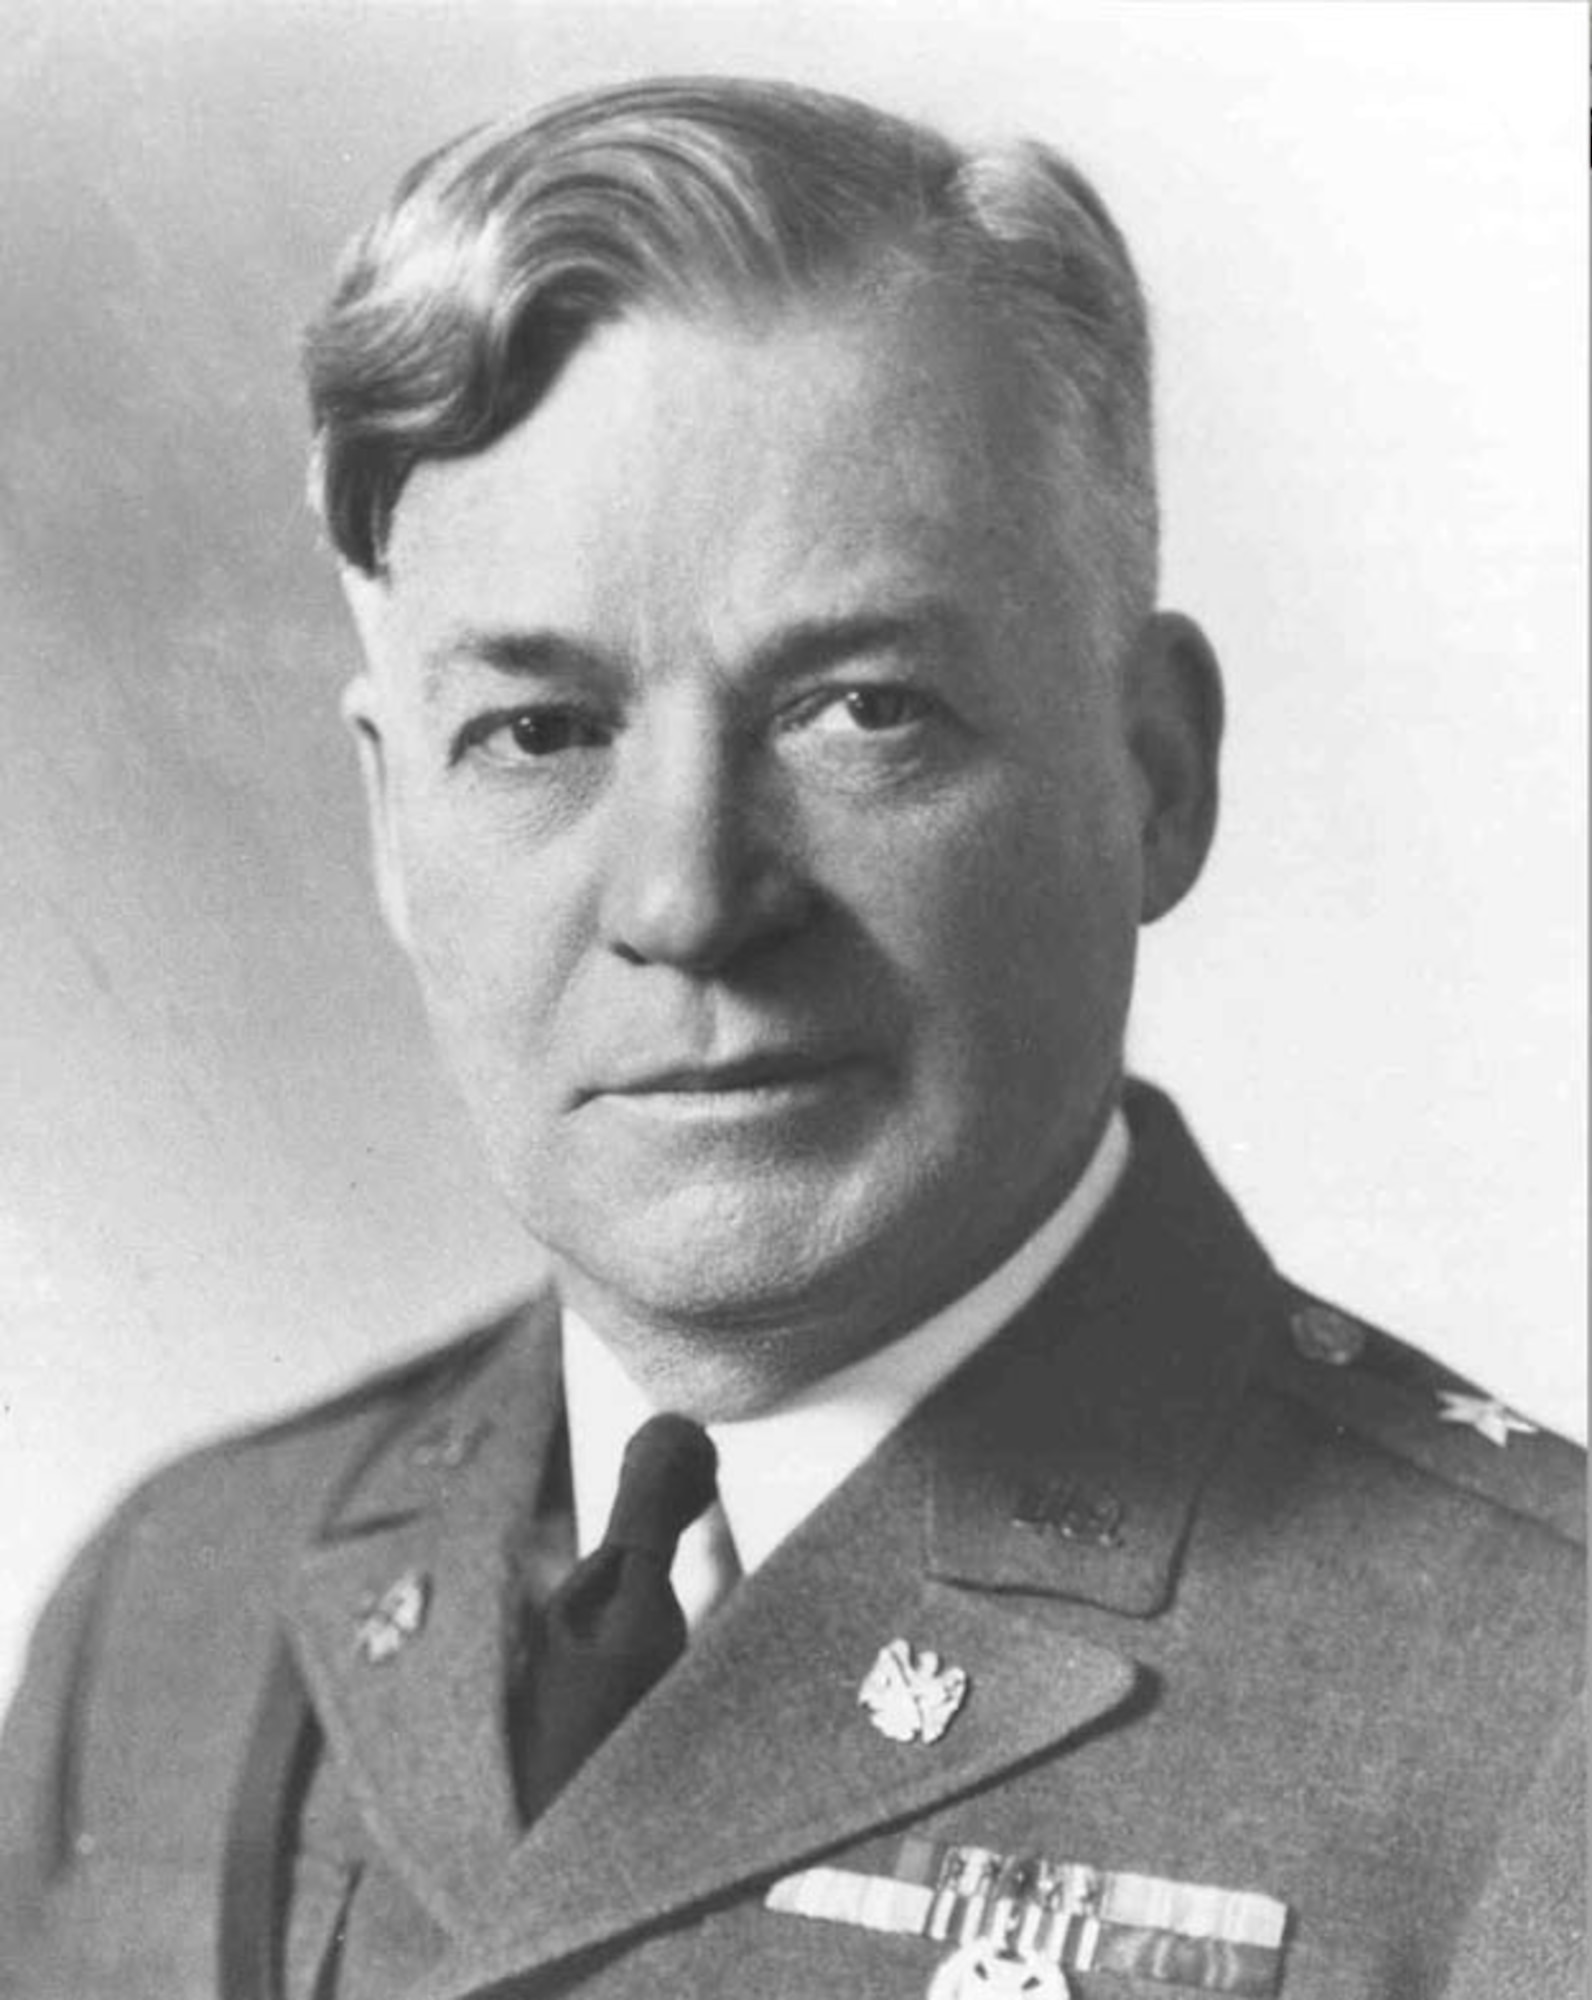 William Graham Everson, former Chief of the National Guard Bureau, was President of Linfield College in Portland and gave remarks at the dedication of Portland Army Air Base on Flag Day, 1941.  Of note, in World War I he commanded the 332nd Infantry Regiment.  This regiment served in Italy and was the only US Army unit to serve east of the Adriatic Sea, which included post-Armistice operations in the Balkans in Serbia, Montenegro, Austria and Dalmatia.  (National Guard Bureau)